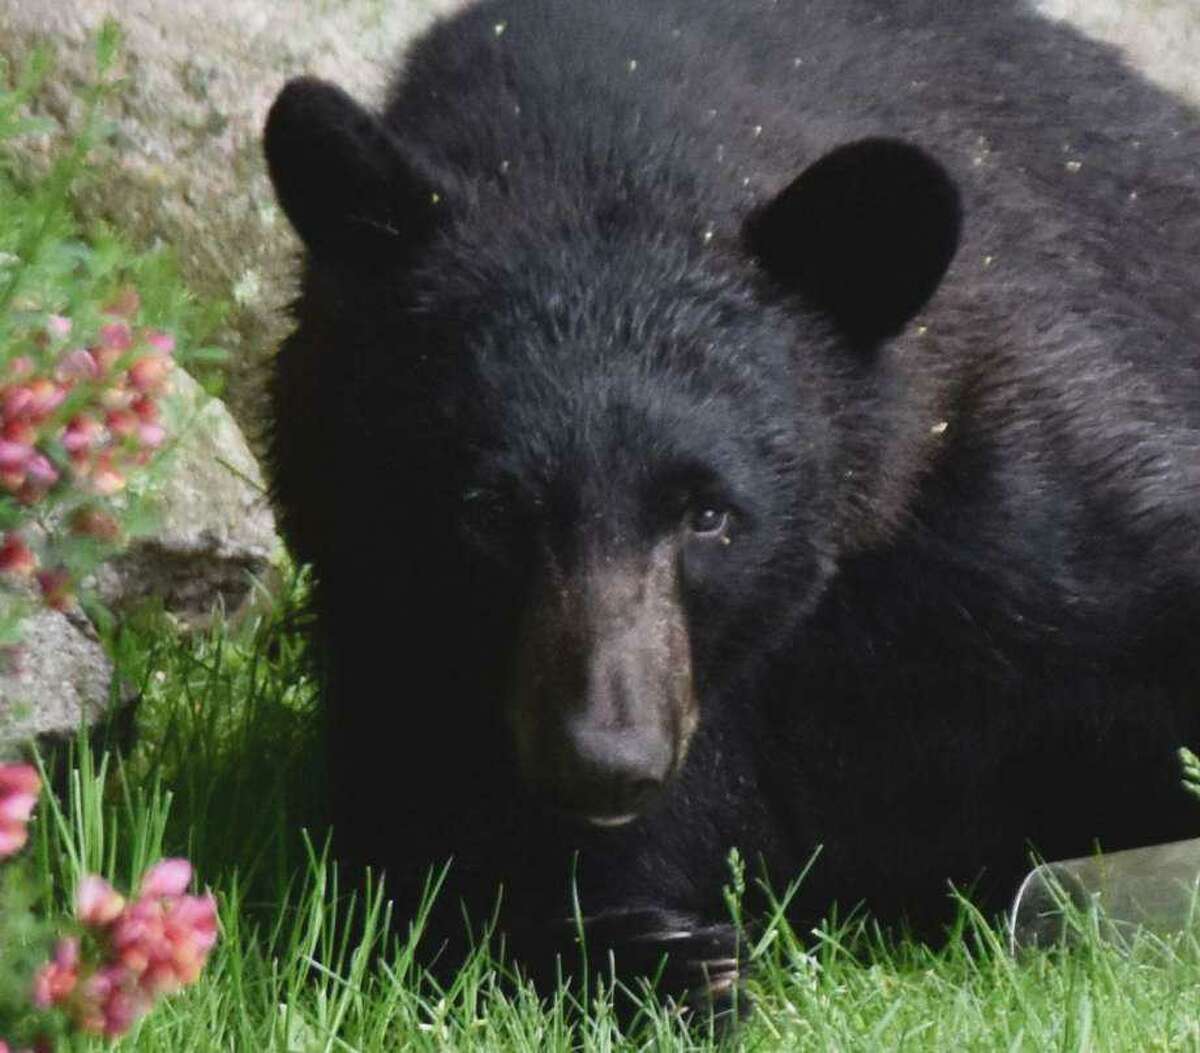 A 26-year-old Thomaston man was arrested by environmental conservation police after killing a mother bear to protect his dog, officials said. The female bear was killed and her two cubs survived. The dog was not hurt. The bear pictured is not the one shot.